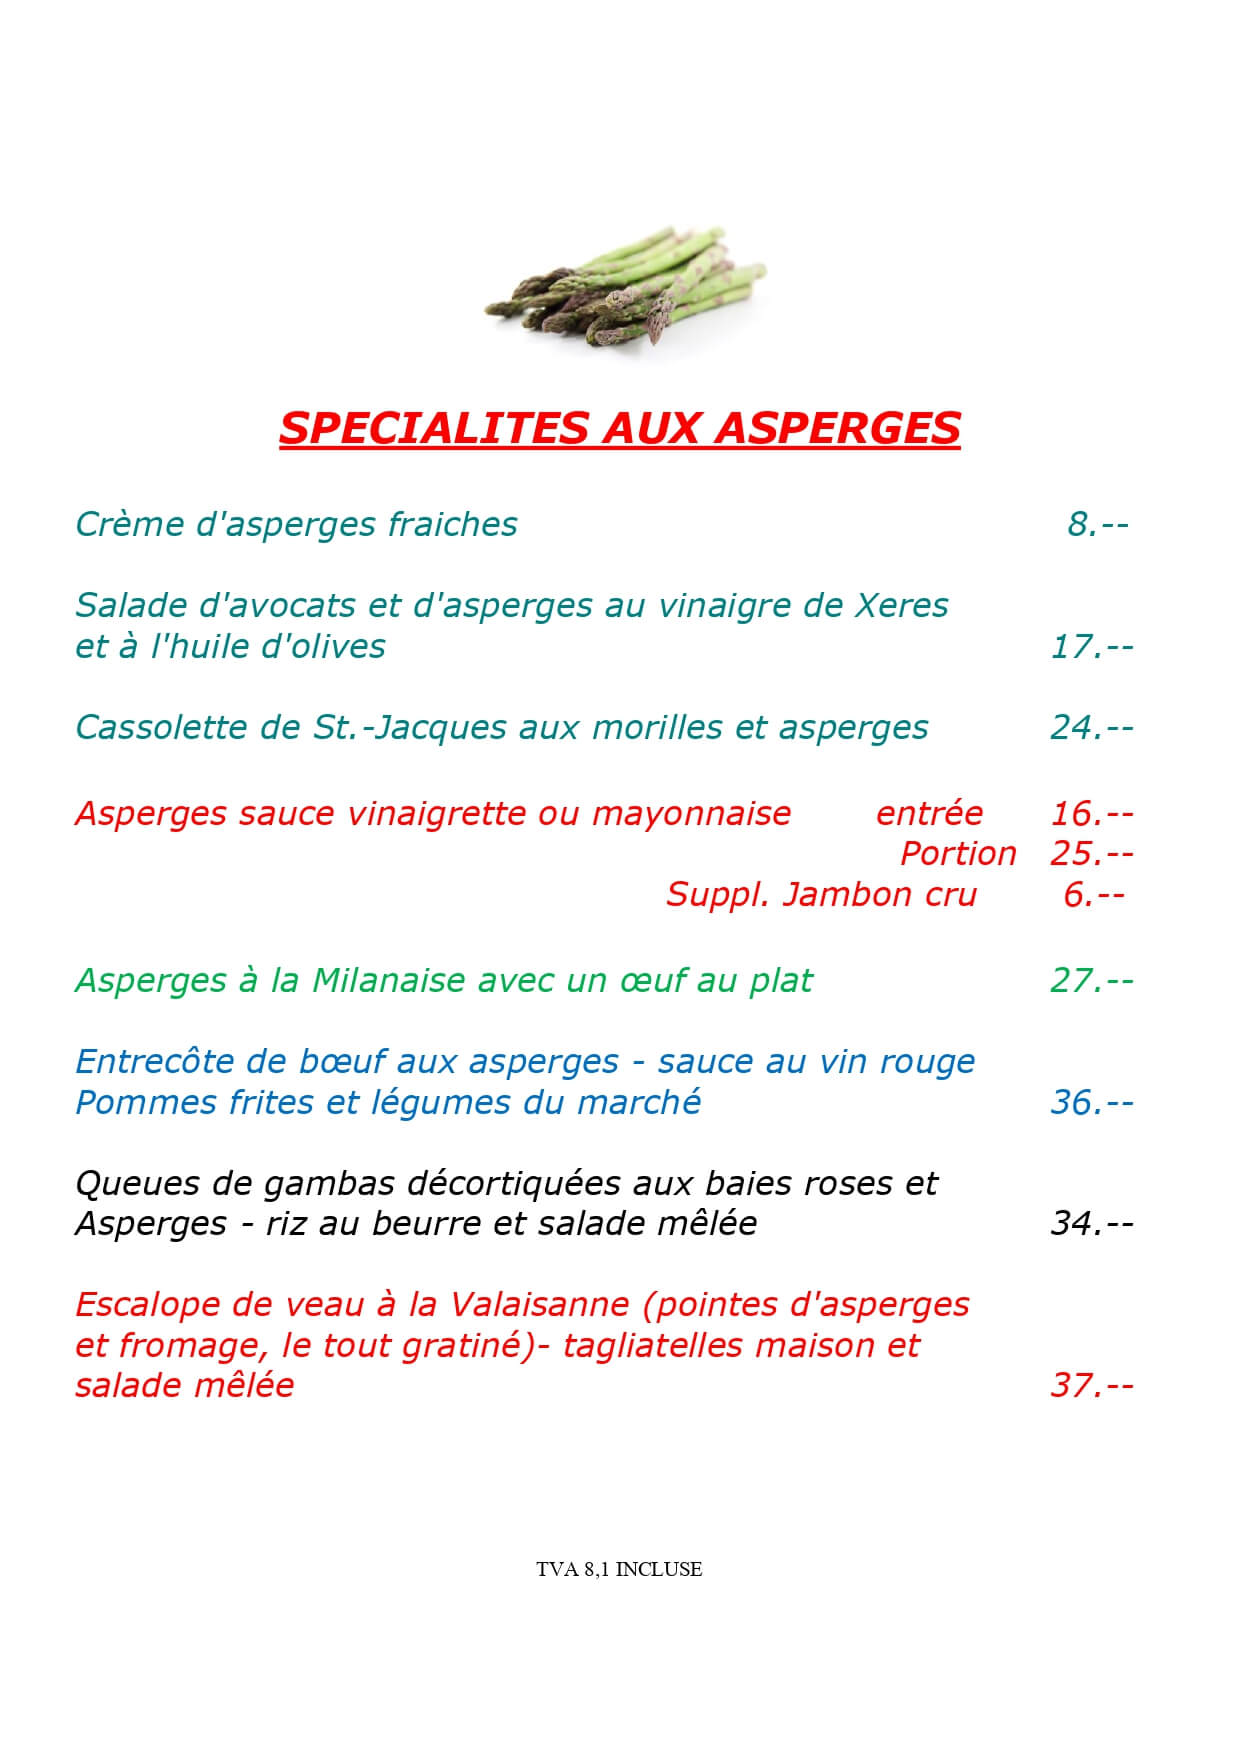 specialites_asperges_2__page-0001